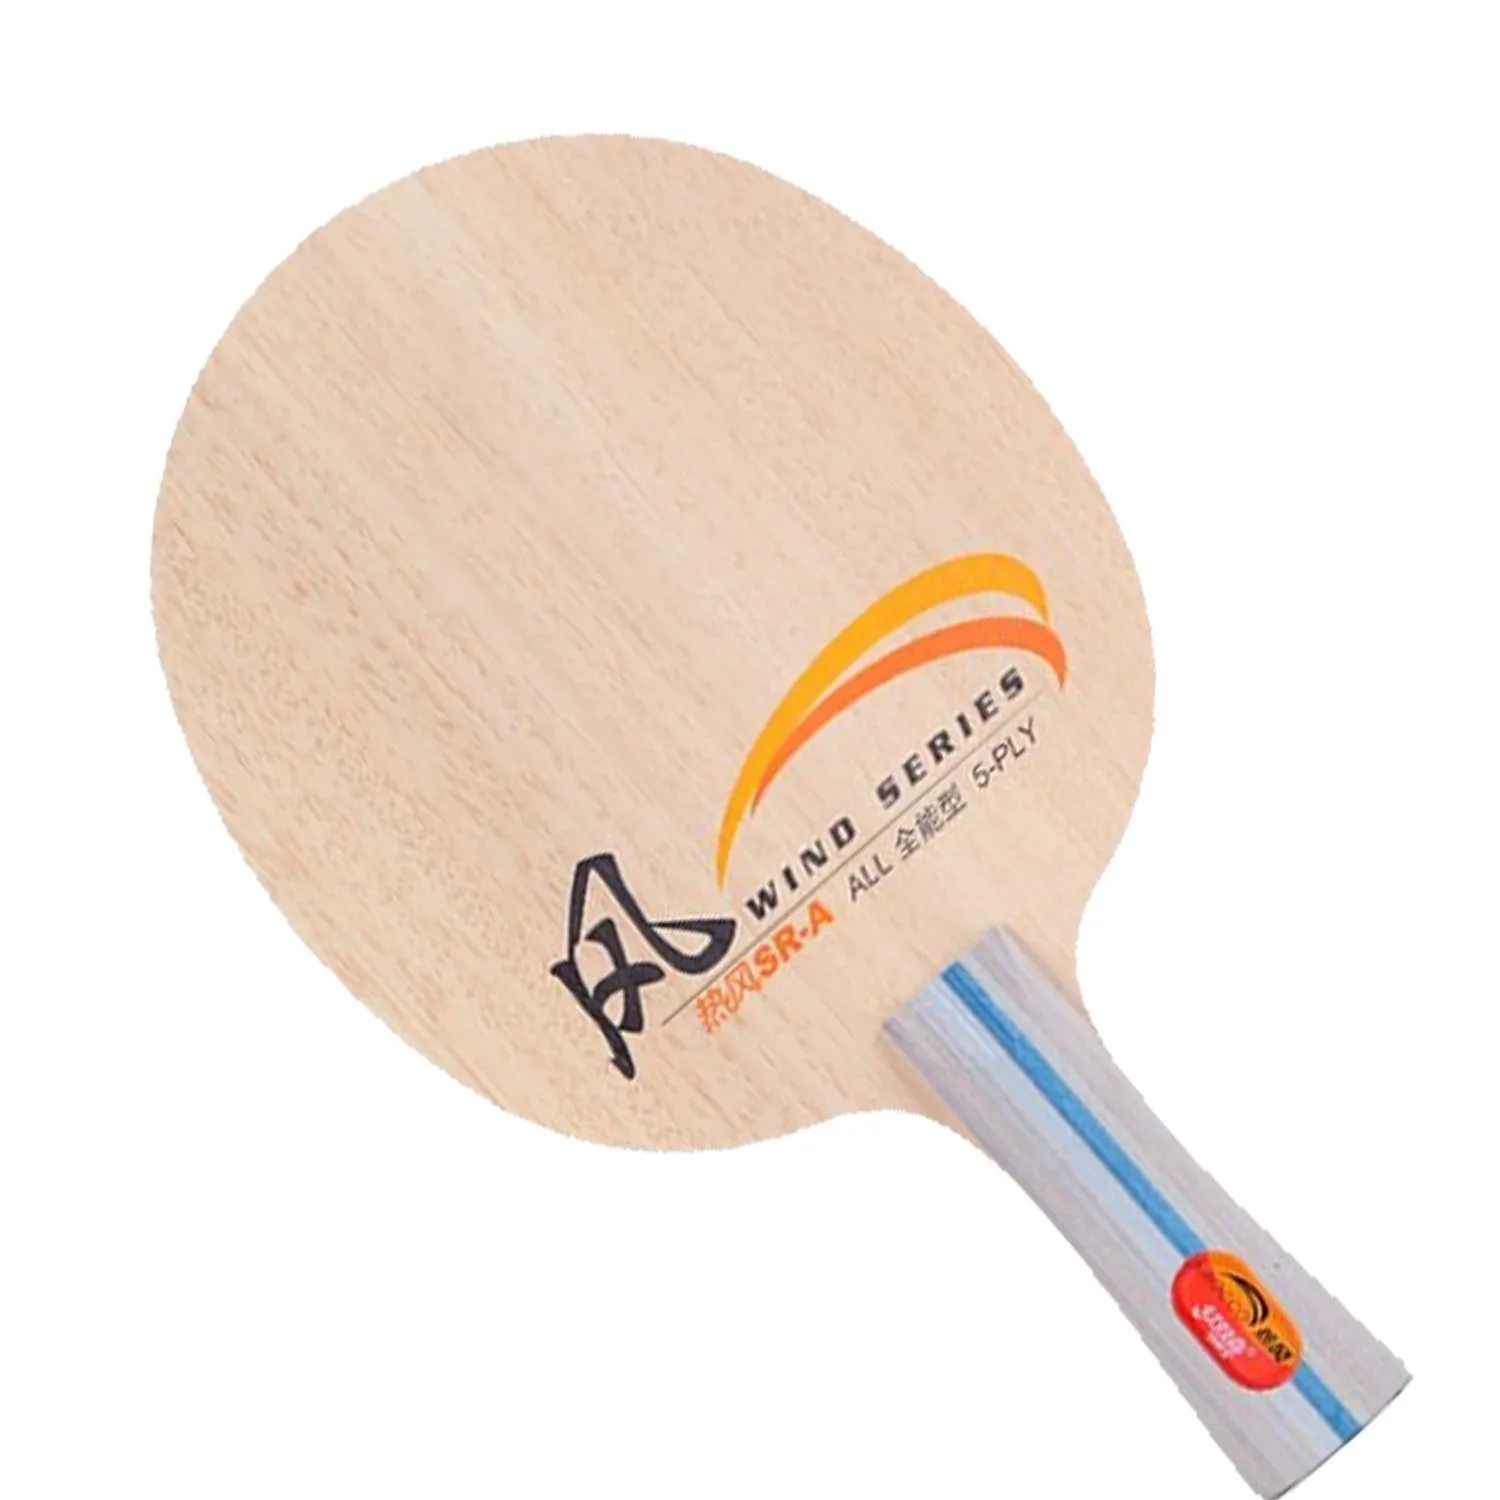 

DHS WIND SERIES SR-A allround SIROCCO 5 PLY Pure wood for Beginners Rackets ping pong bat paddle tenis de mesa